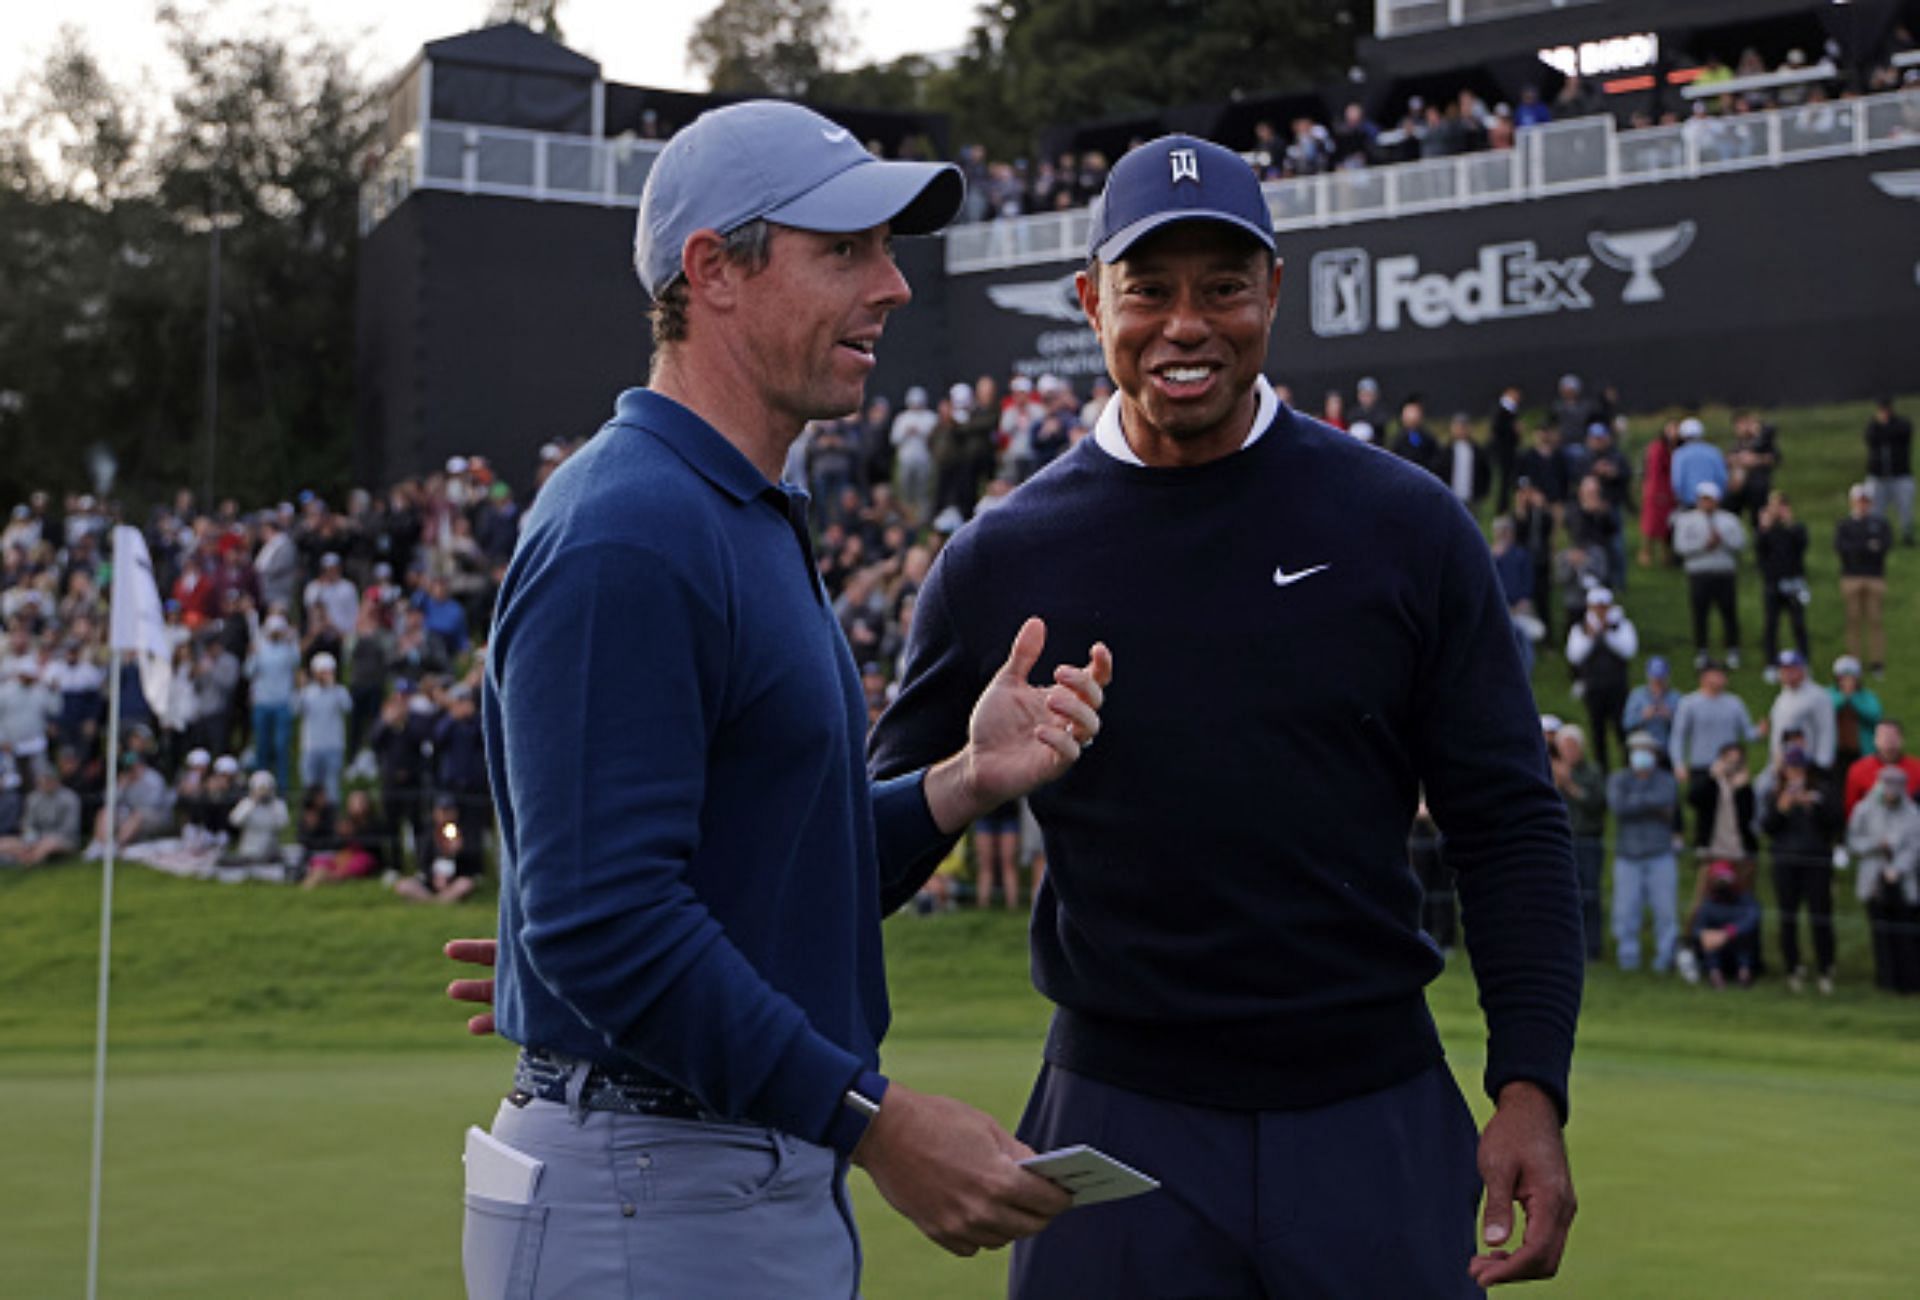 Tiger Woods and Rory McIlroy (Image via Getty).